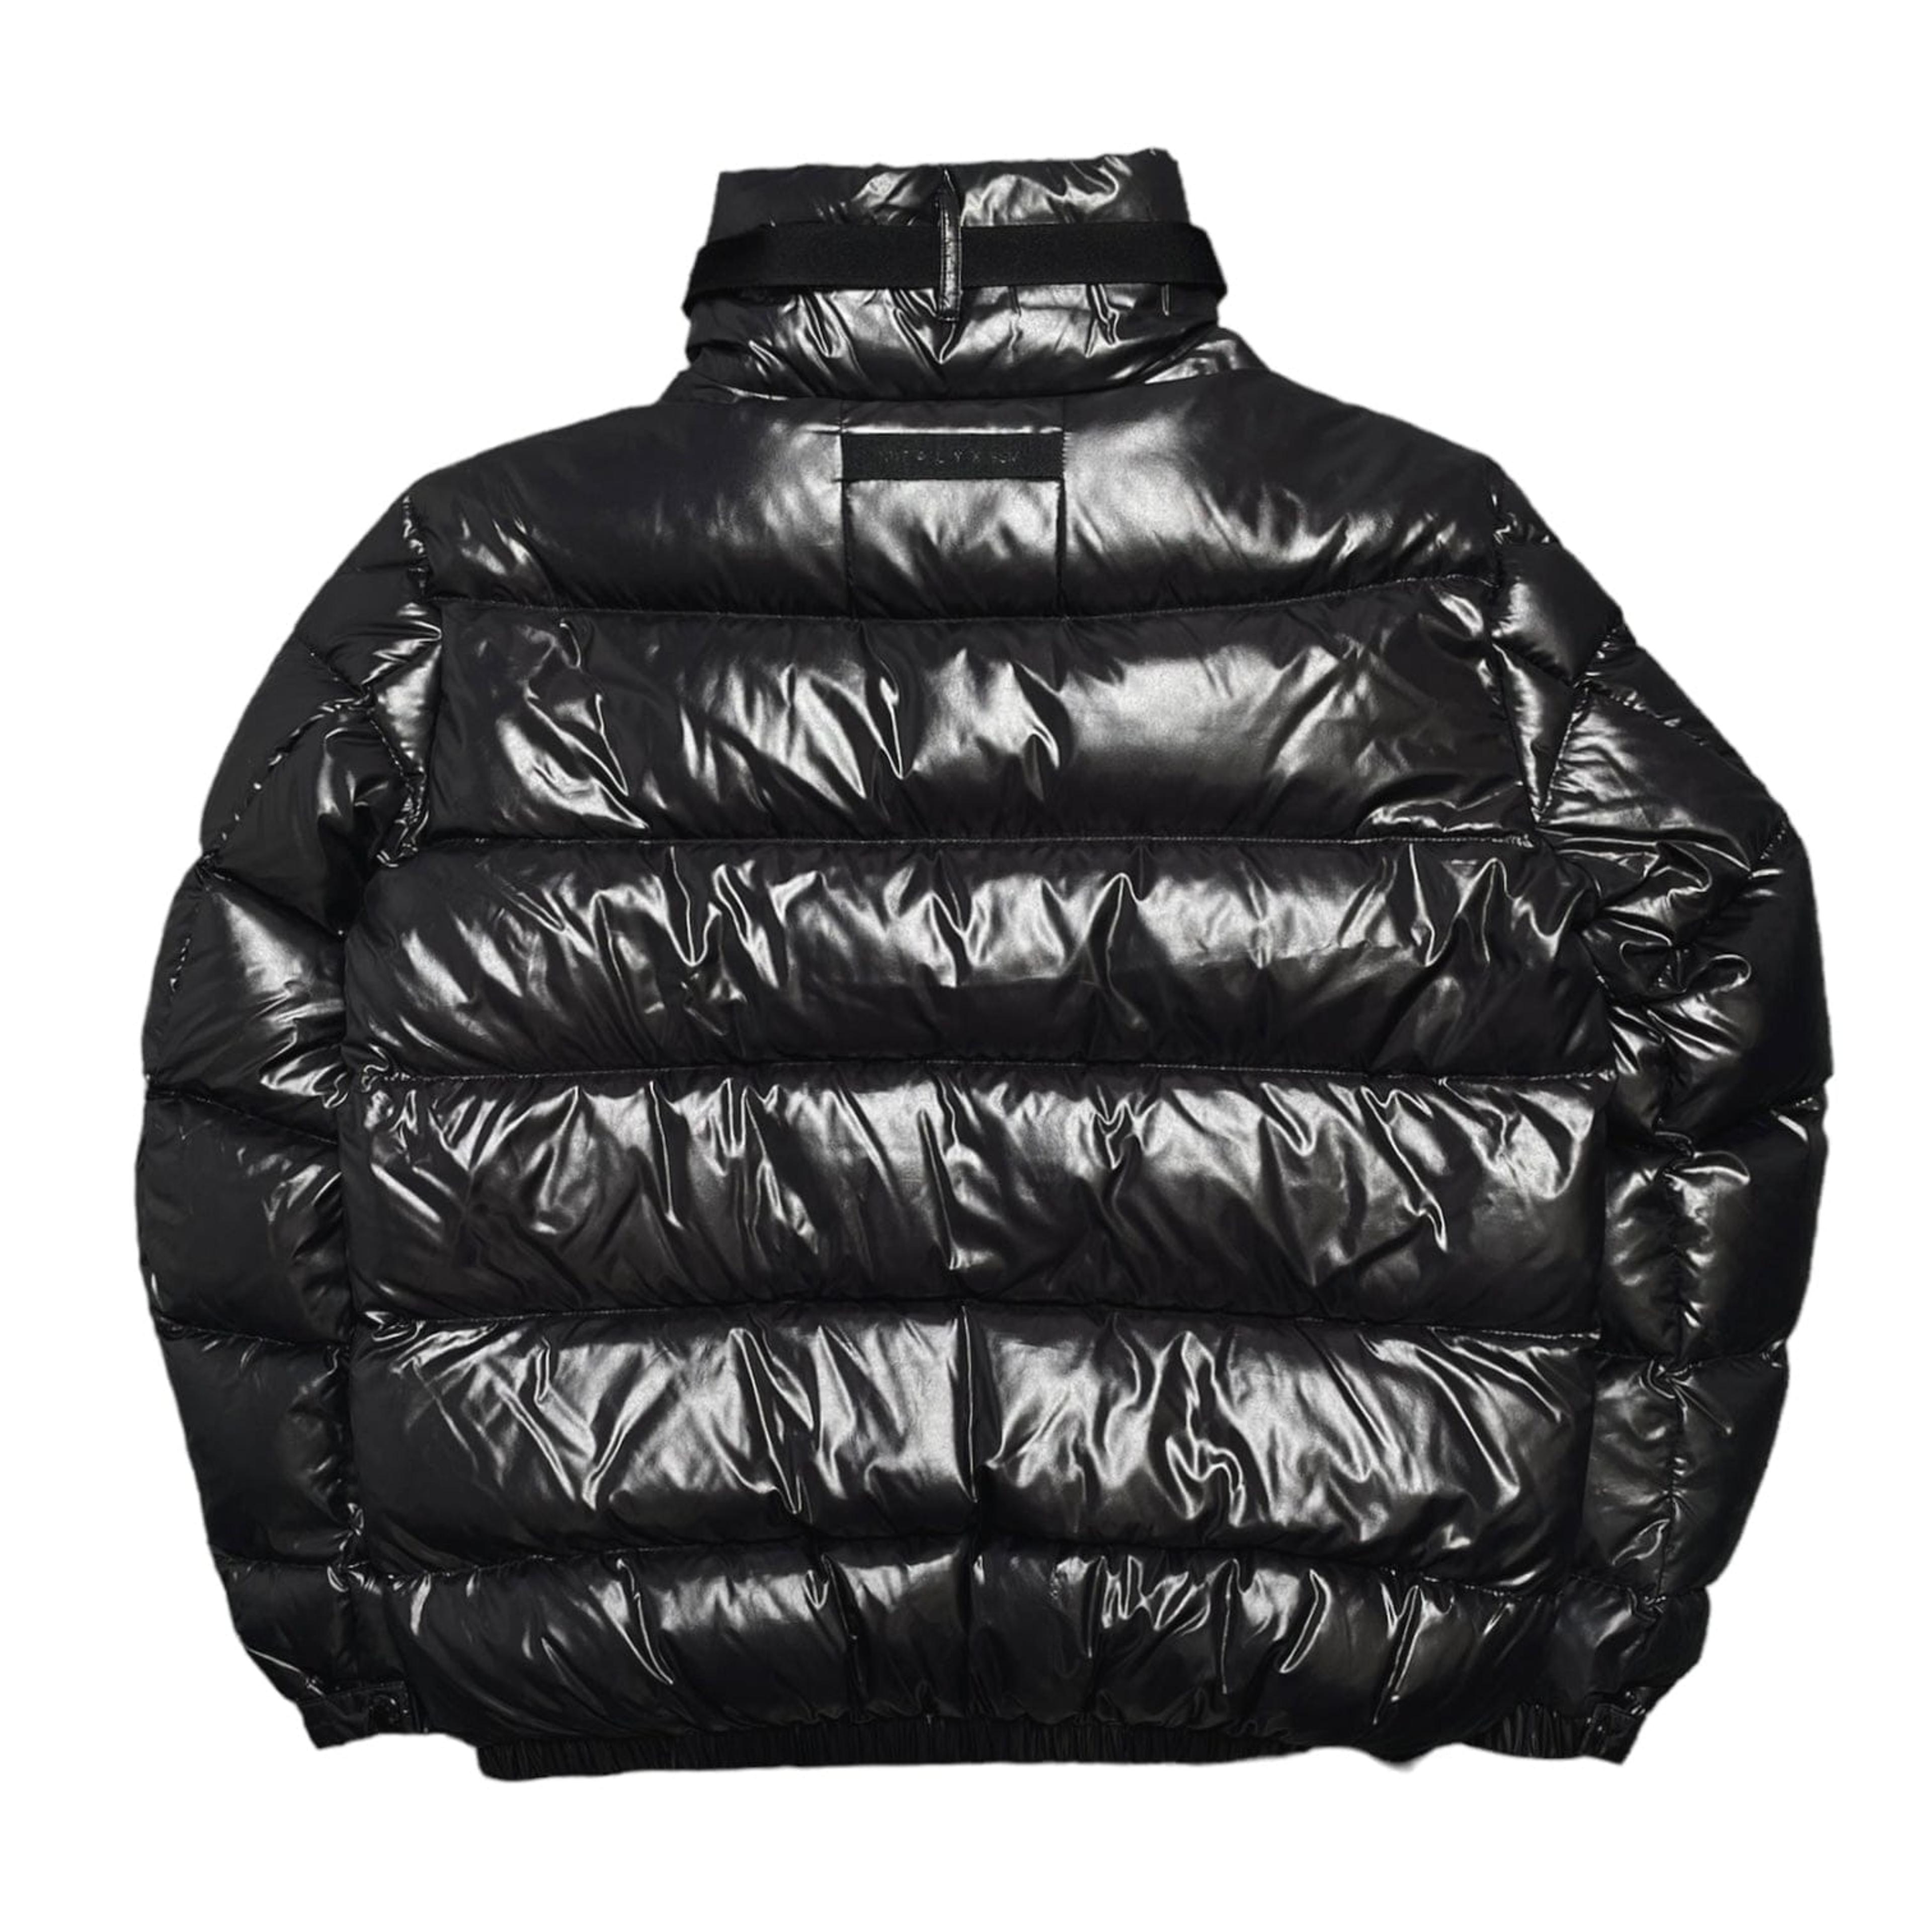 Alternate View 1 of Moncler x 1017 ALYX 9SM Sirus Down Jacket Black Pre-Owned